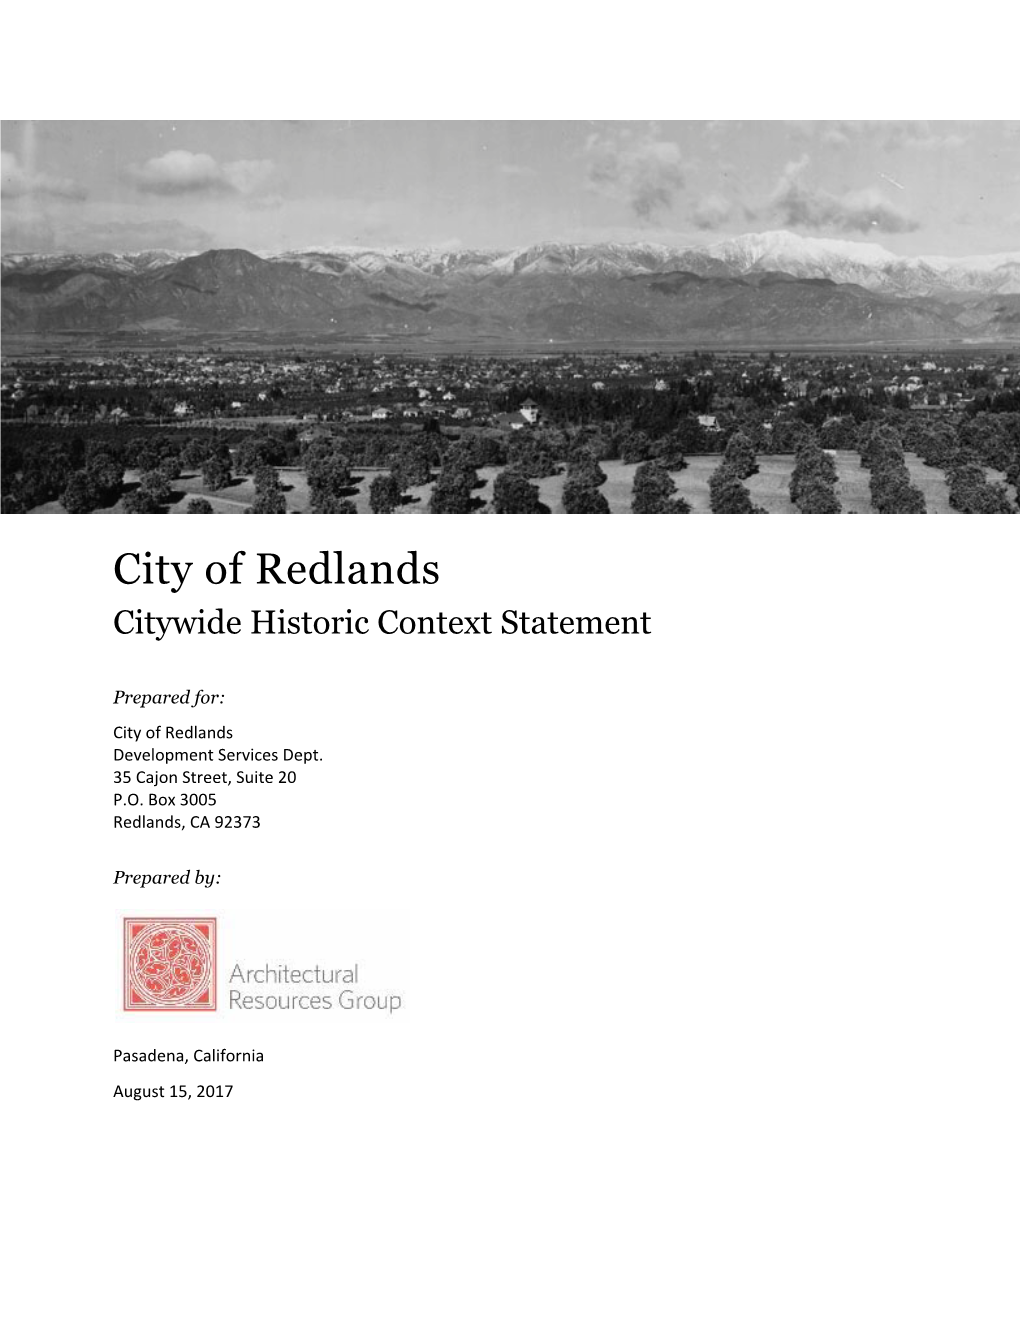 City of Redlands Citywide Historic Context Statement